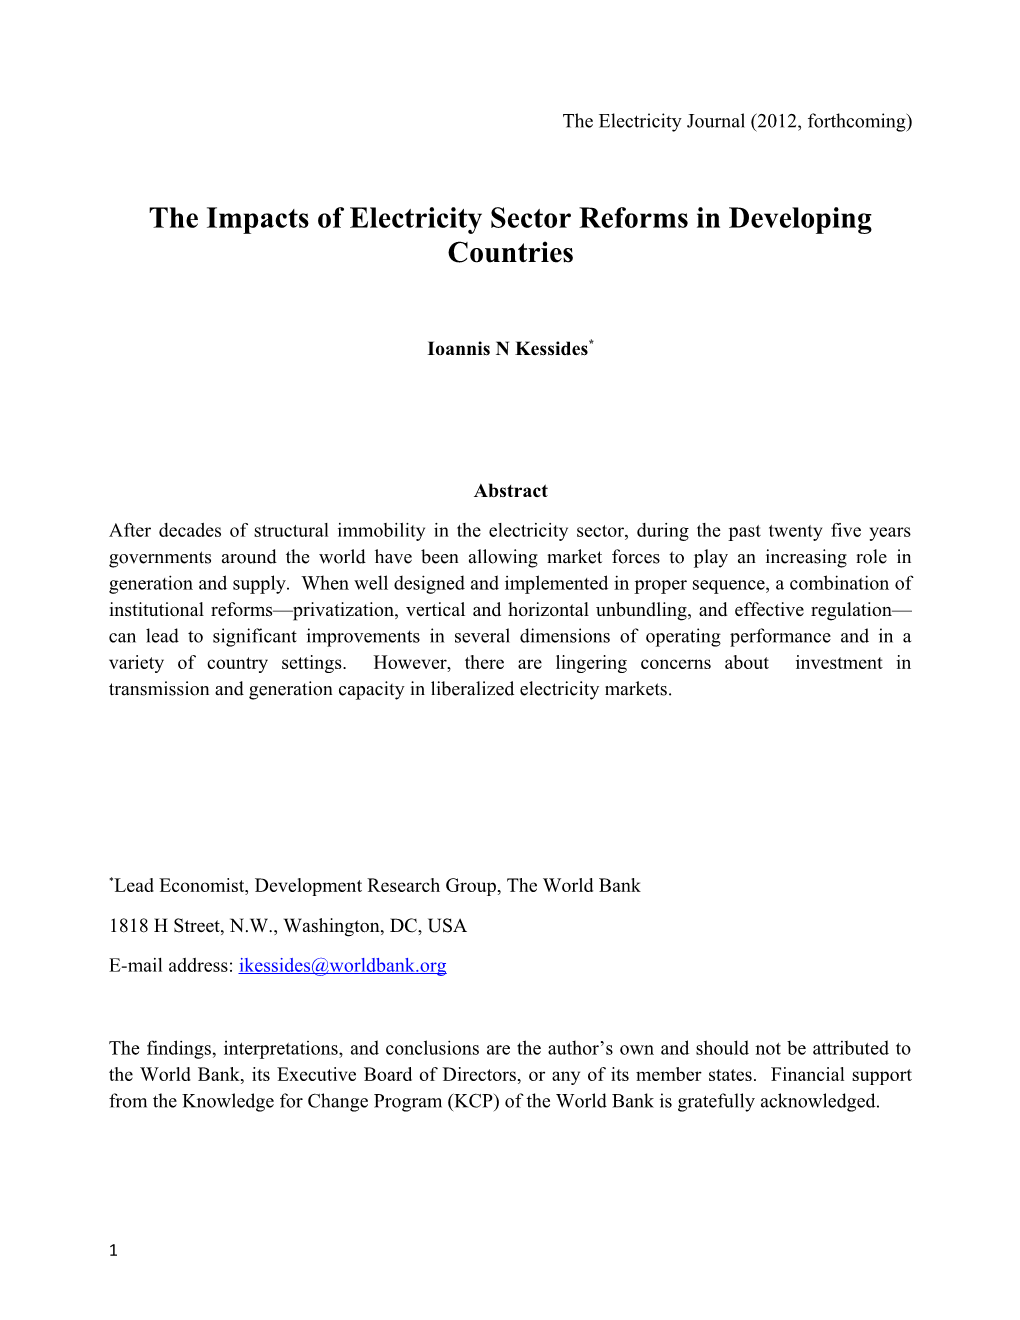 The Impacts of Electricity Sector Reforms in Developing Countries